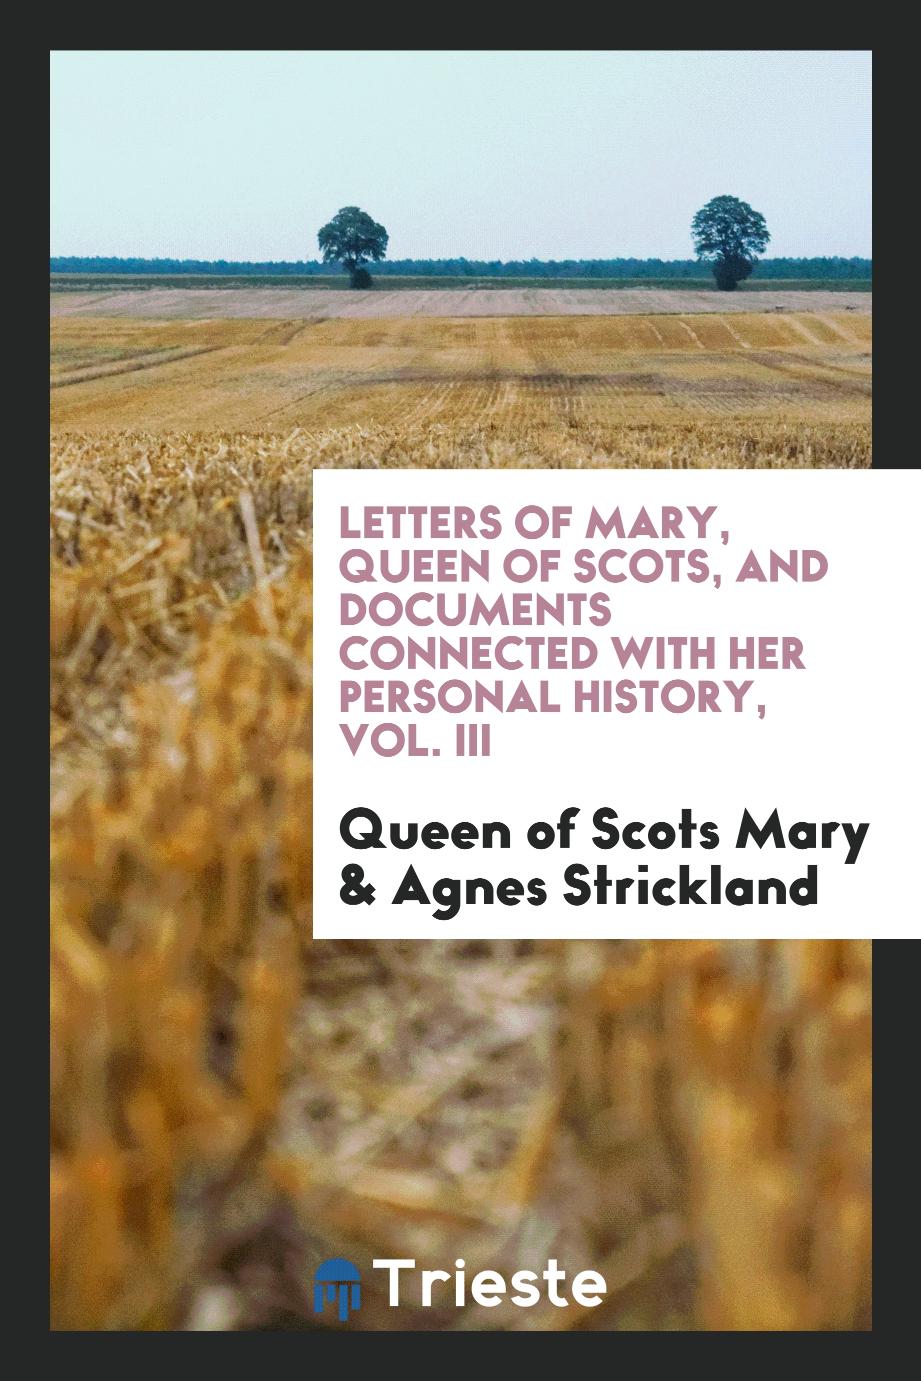 Letters of Mary, Queen of Scots, and Documents Connected with Her Personal History, Vol. III